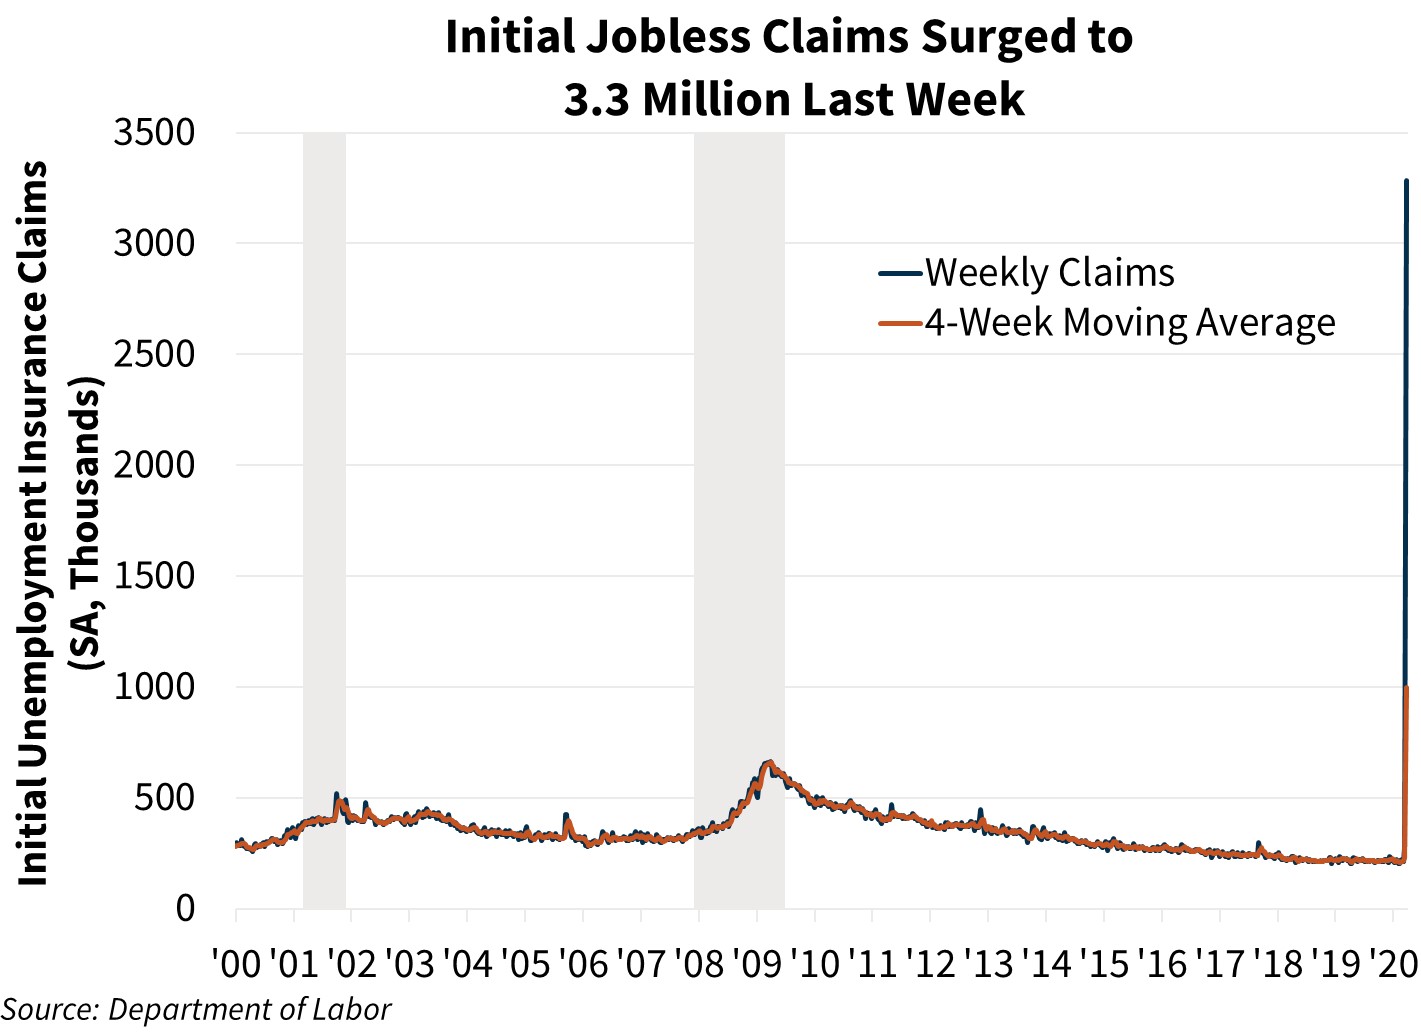  Initial Jobless Claims Surged to 3.3 Million Last Week